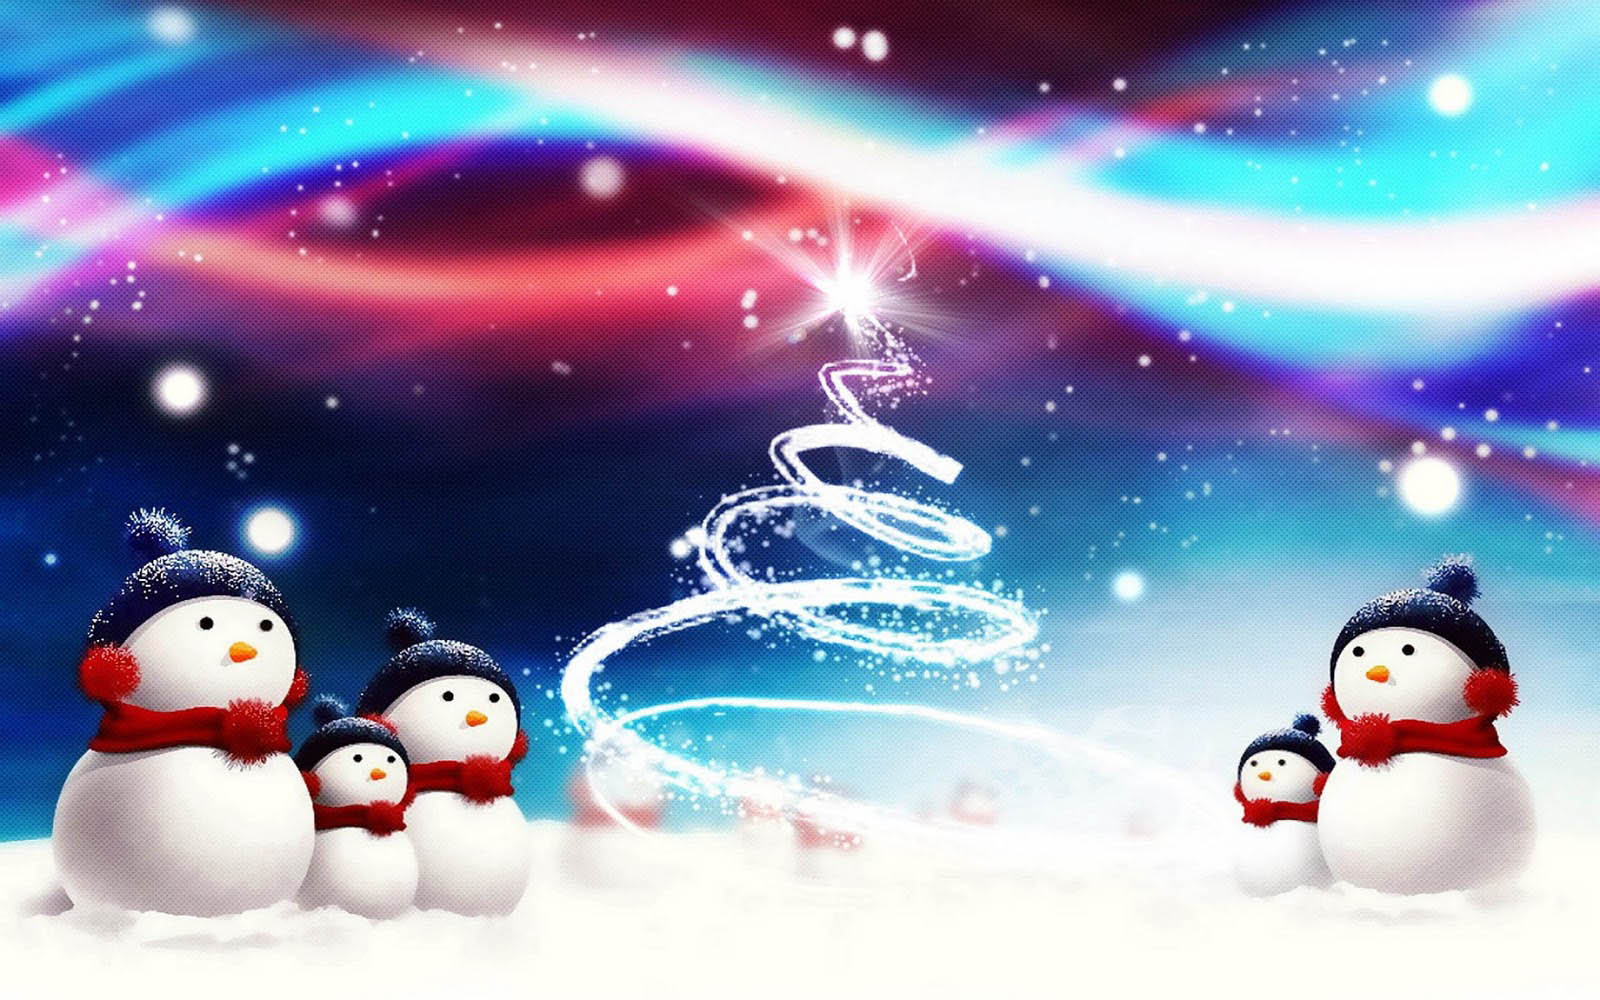 Desktop Background A New Look With These Lovely Xmas Snowman In High